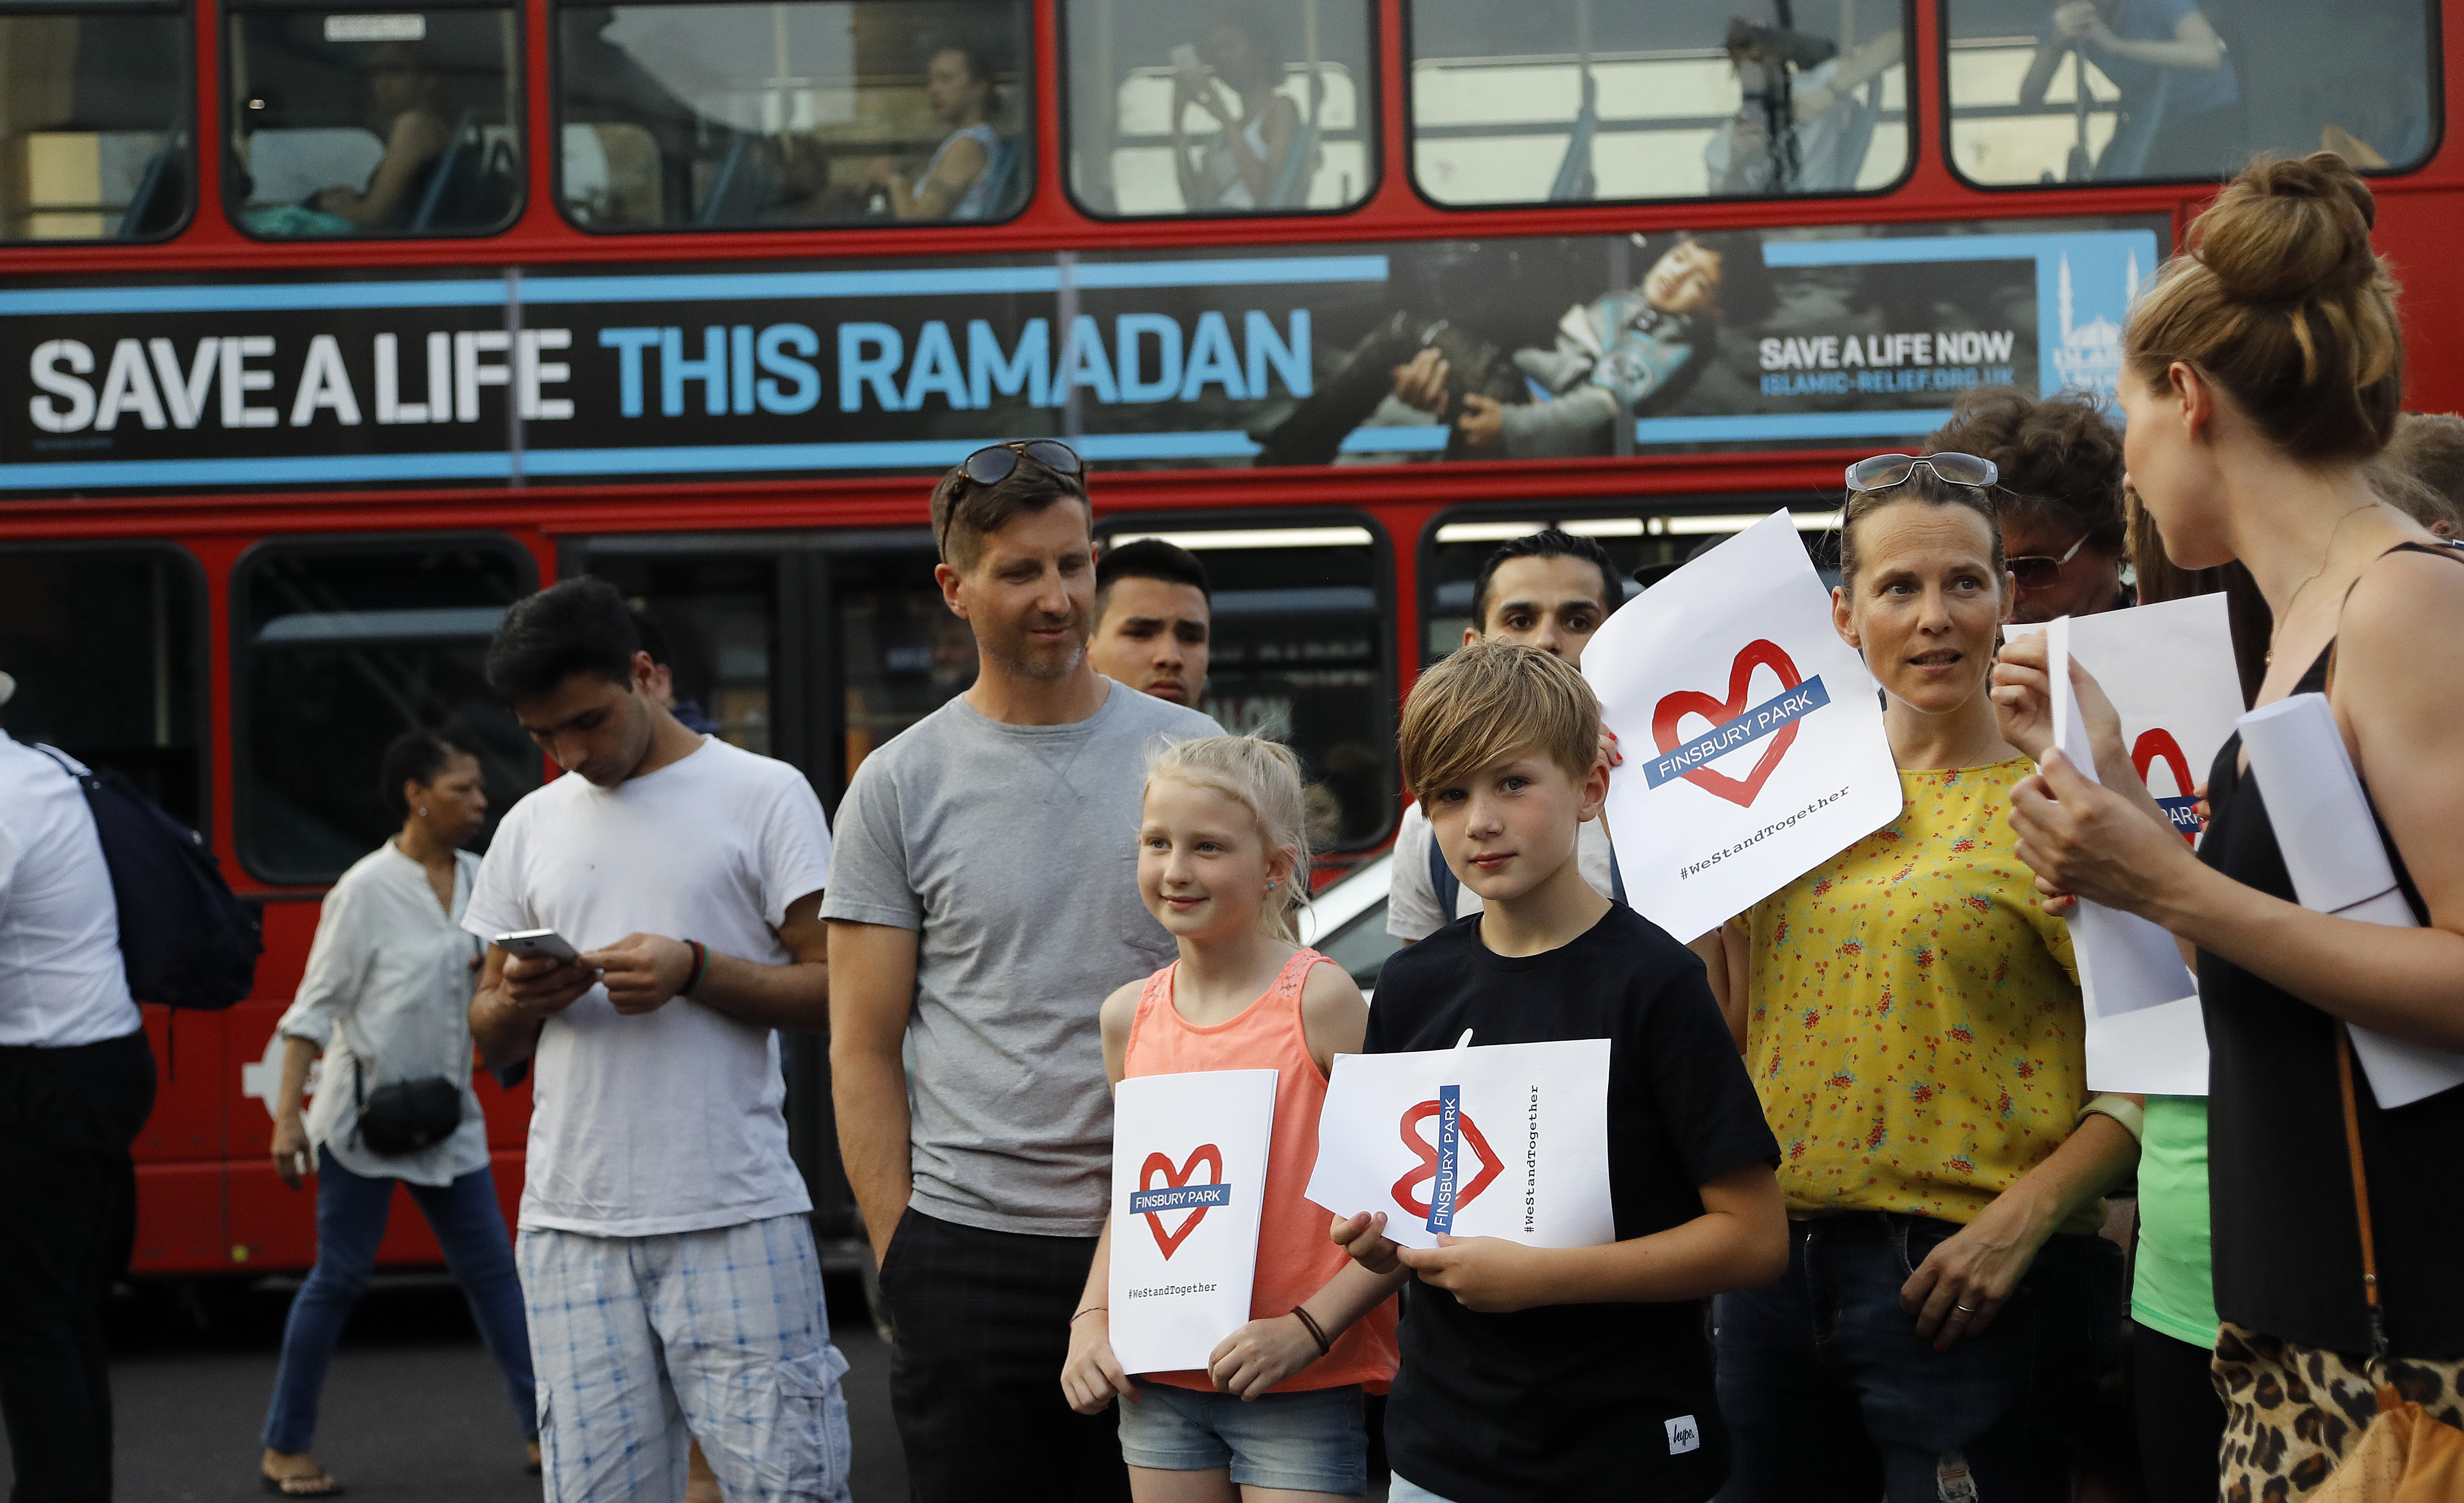 People take part in a vigil at Finsbury Park in north London, where a vehicle struck pedestrians in north London Monday, June 19, 2017. A vehicle struck pedestrians near a mosque in north London early Monday morning. (AP Photo/Frank Augstein)